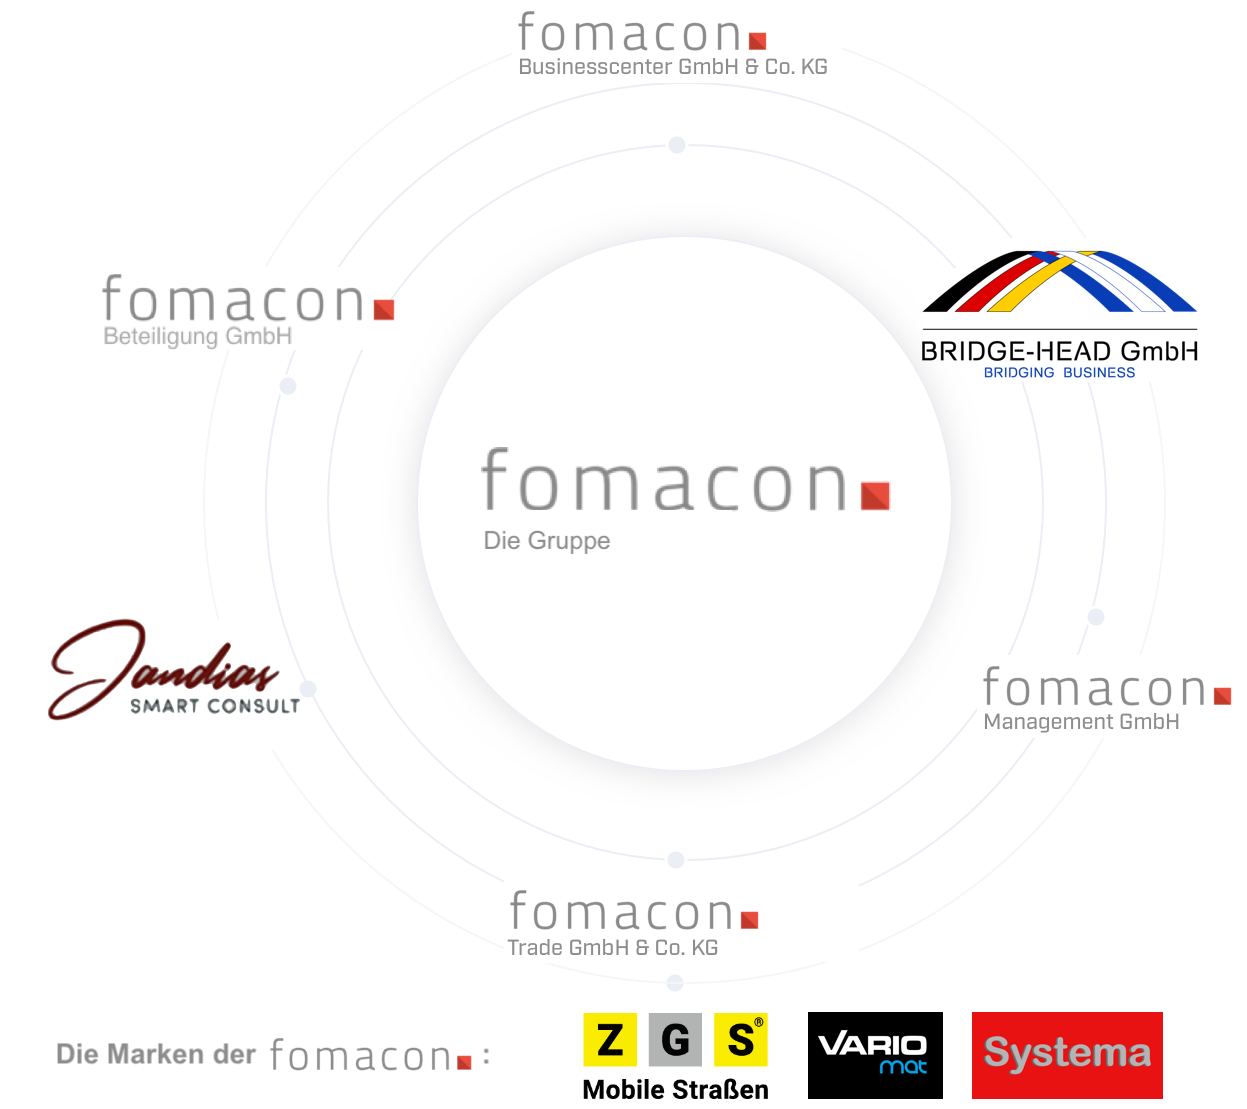 The fomacon Group